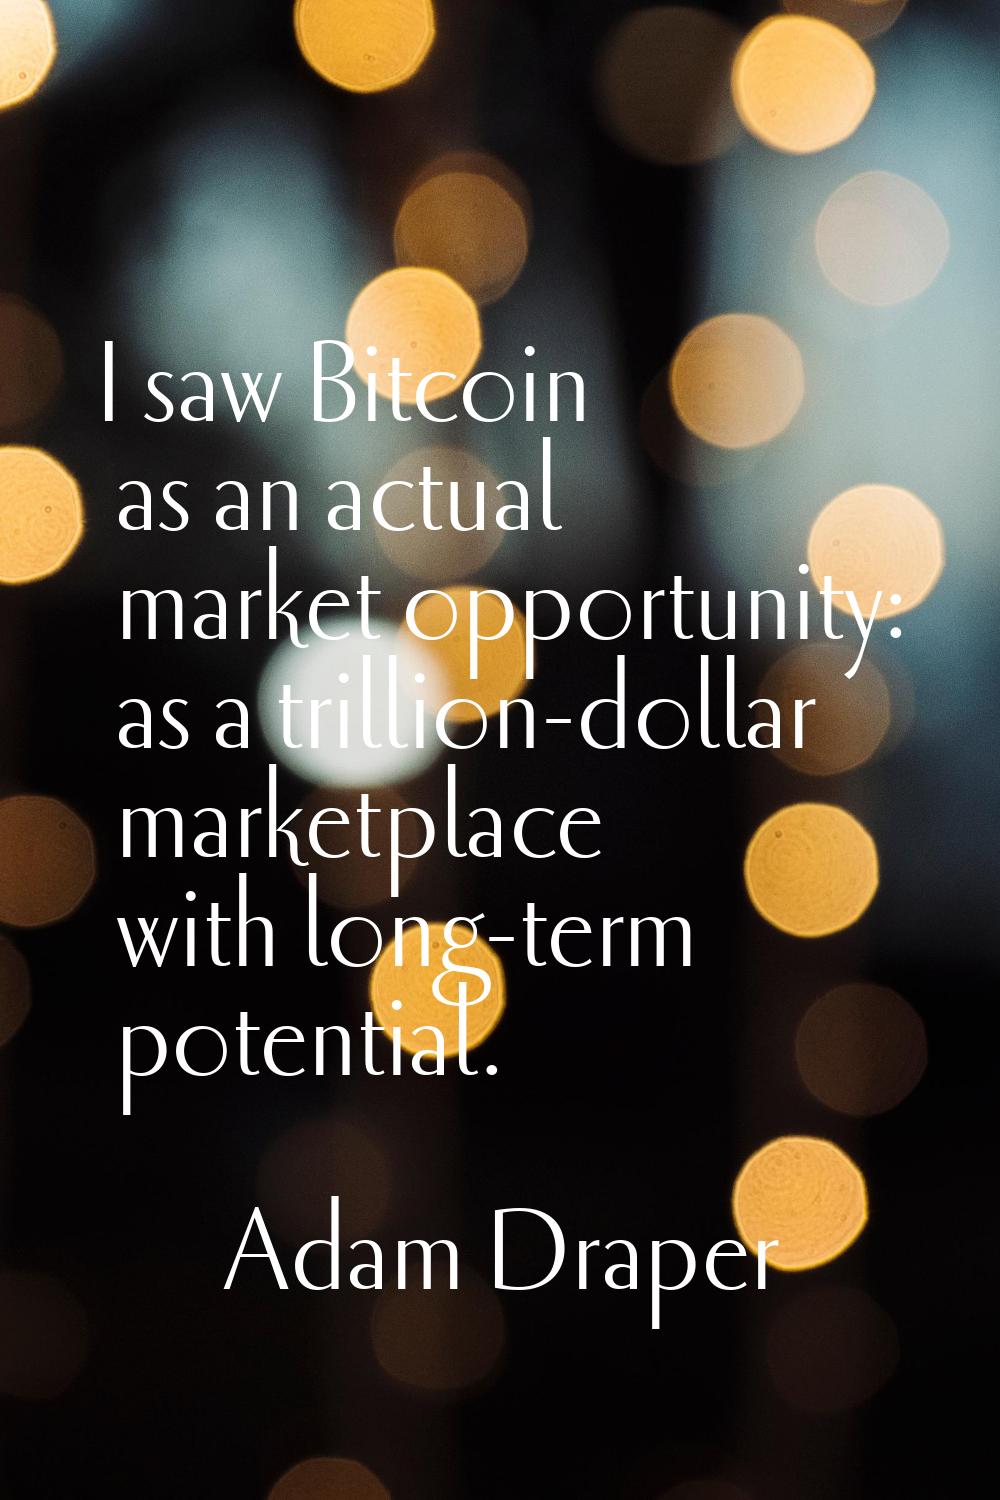 I saw Bitcoin as an actual market opportunity: as a trillion-dollar marketplace with long-term pote